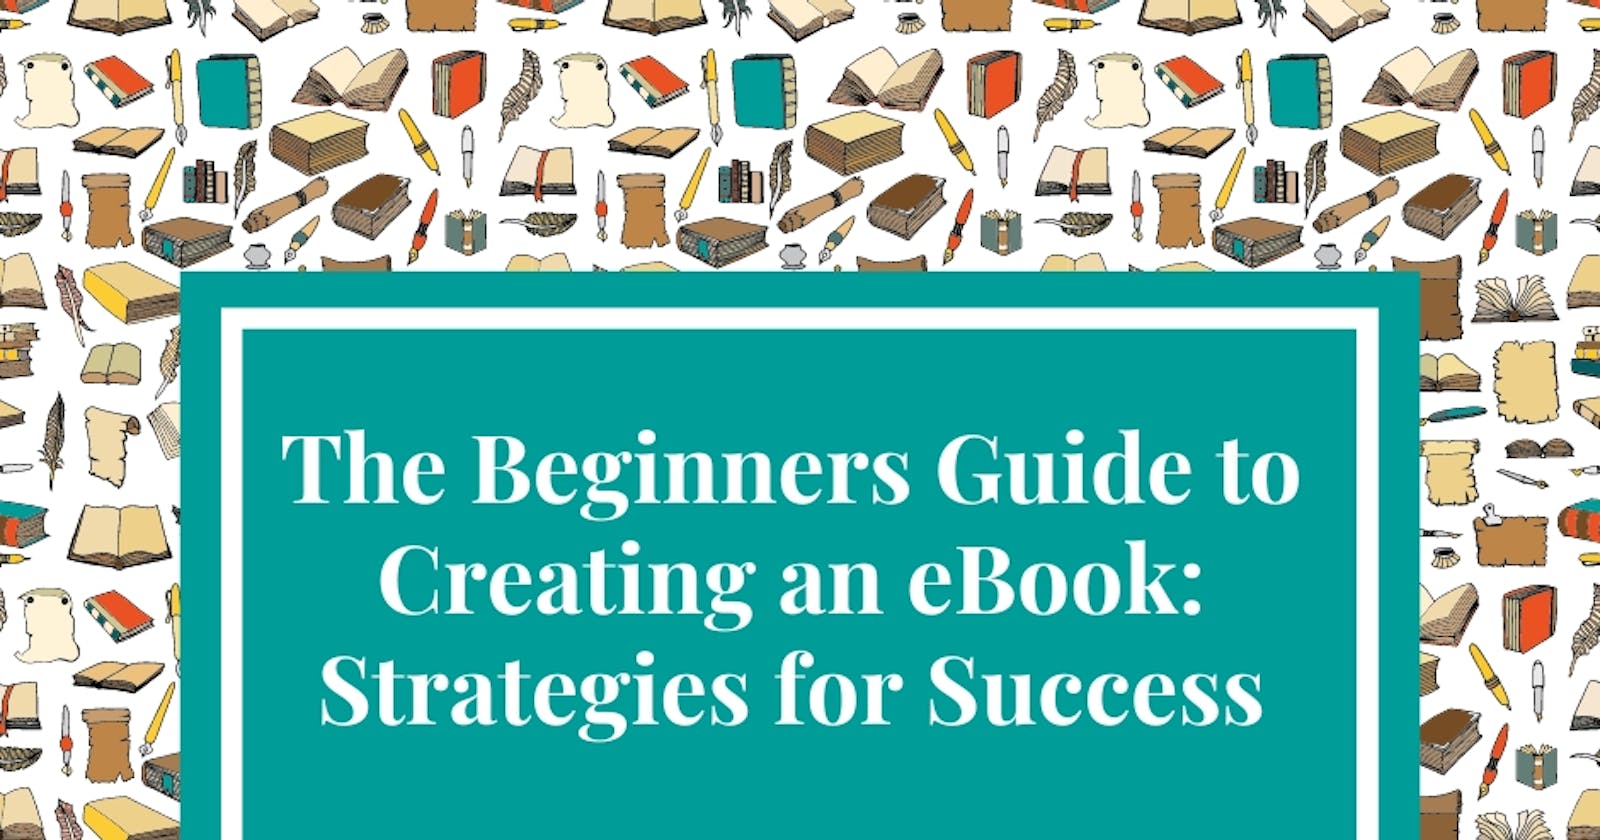 The Beginners Guide to Creating an eBook: Strategies for Success